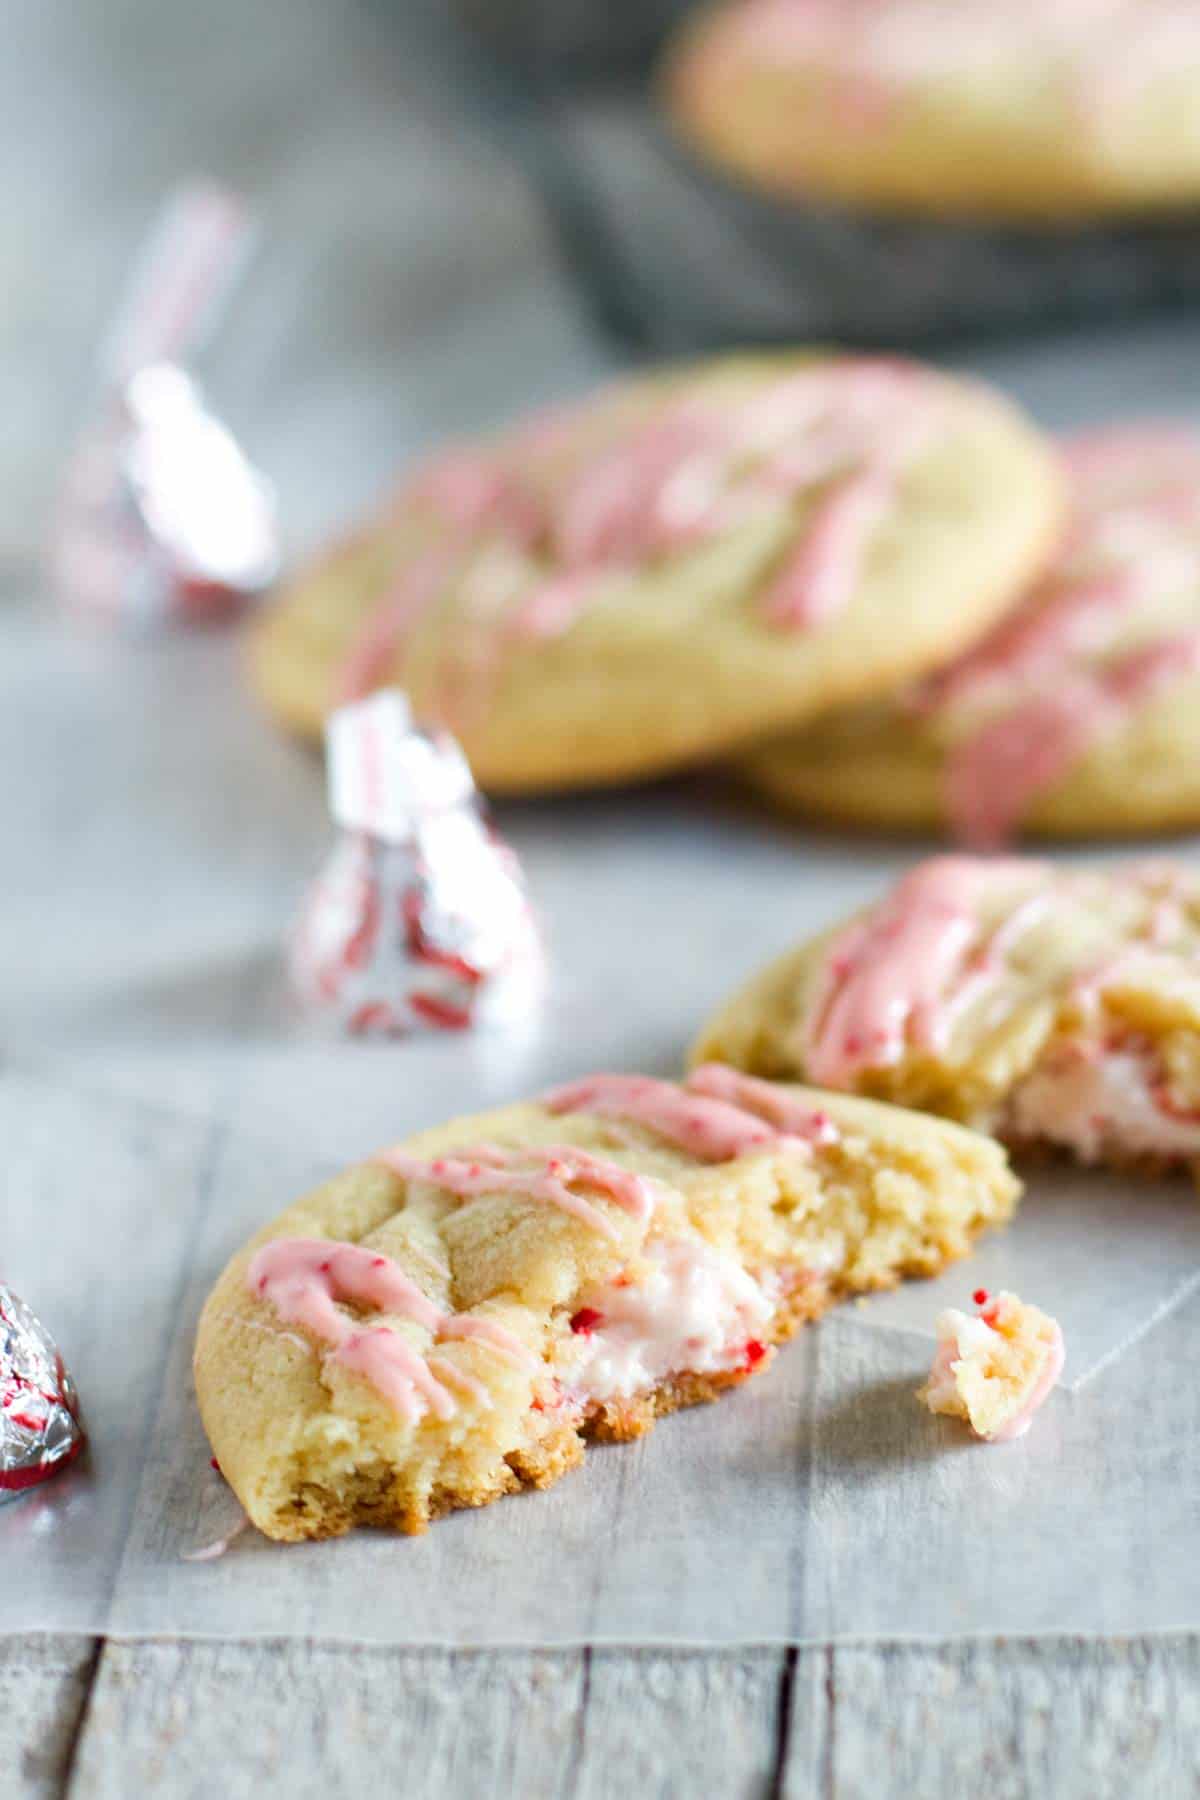 Candy cane kiss stuffed pudding cookie broken in half to show peppermint kiss in the center.